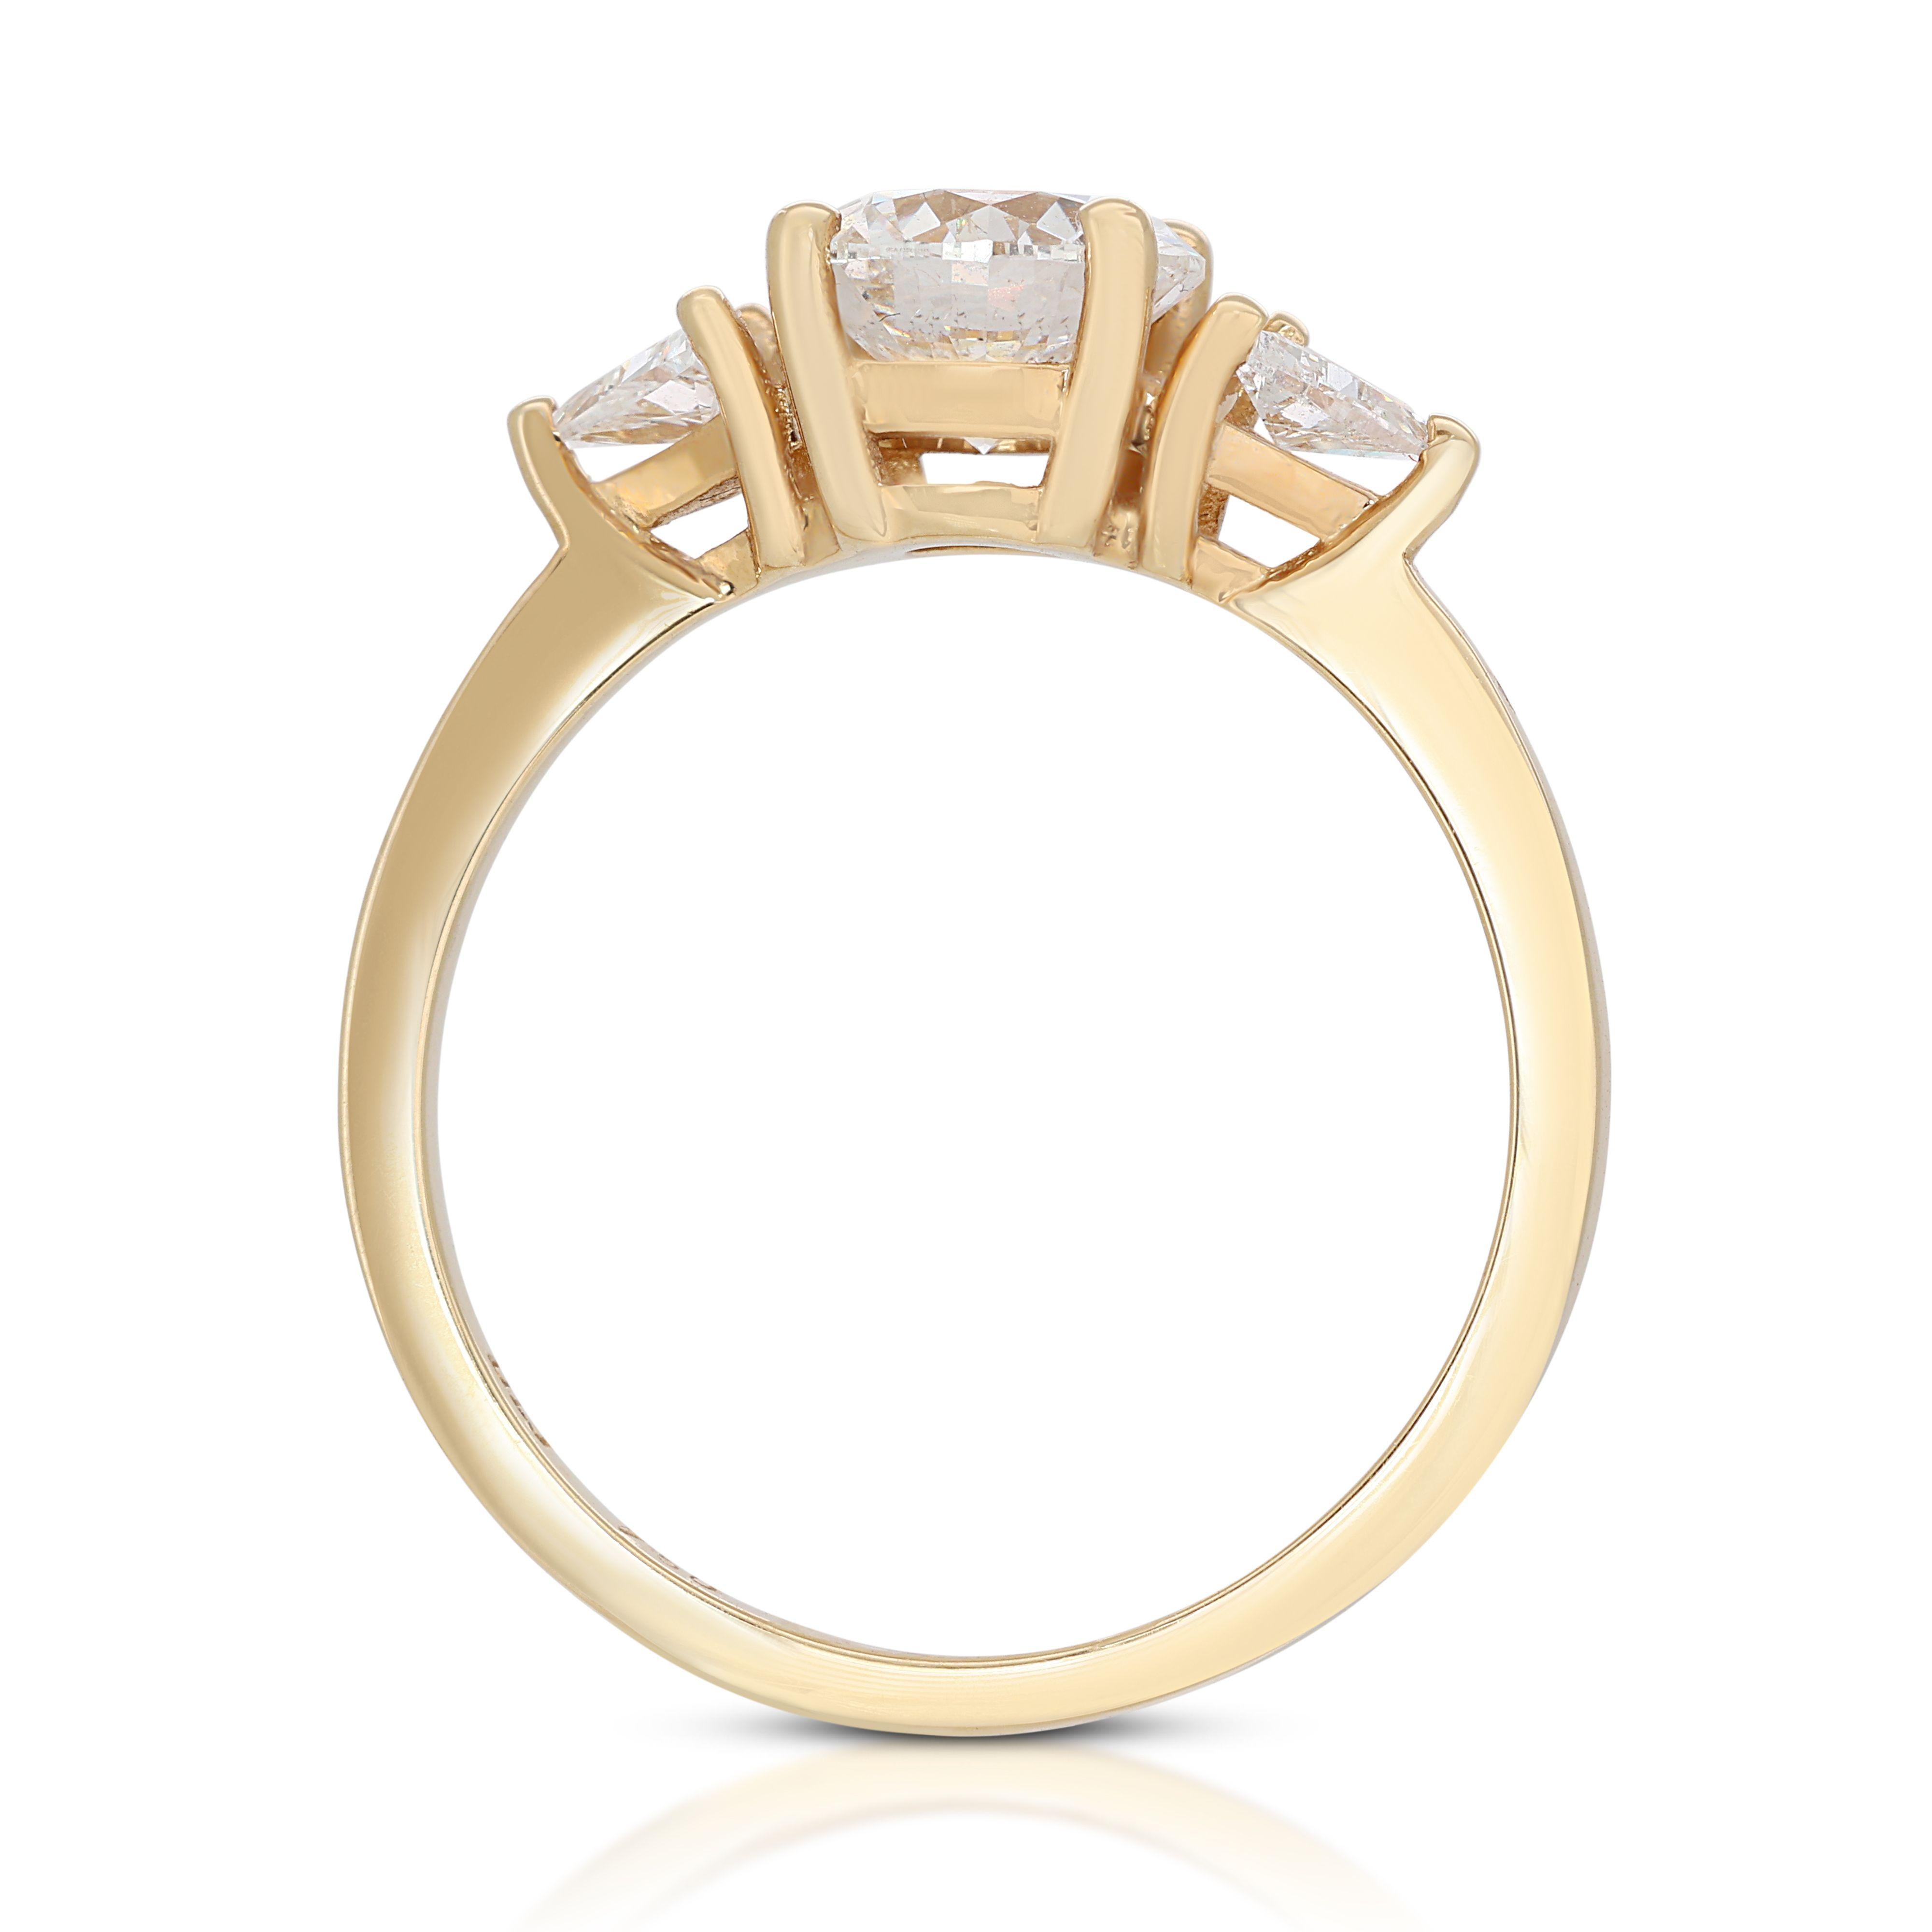 Captivating 3-stone 1.21ct Diamond Ring set in 18K Yellow Gold For Sale 1